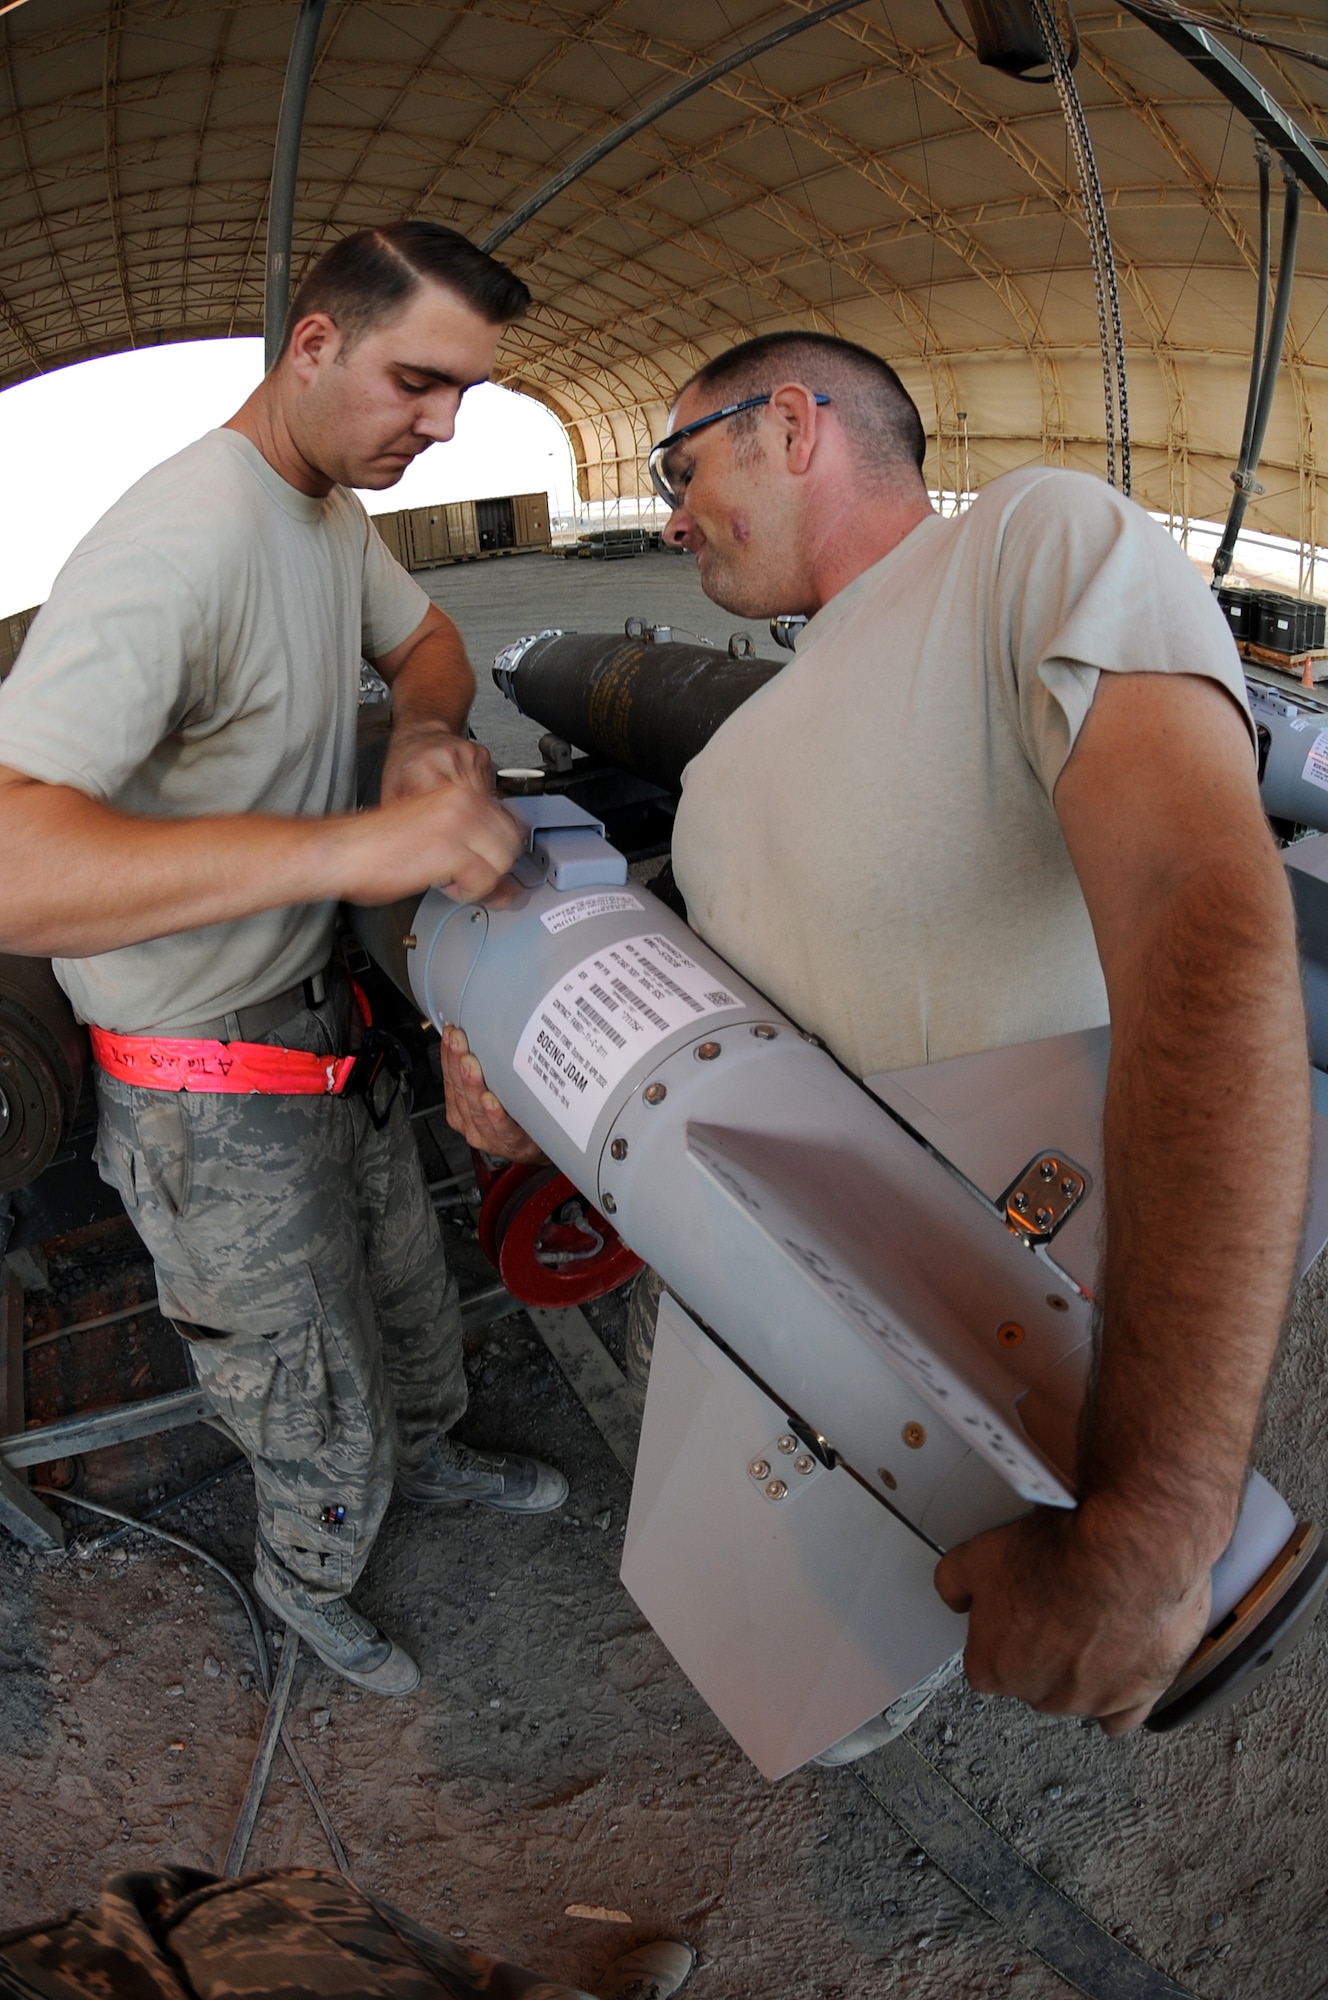 Master Sgt. Adam, right, and Senior Airman Adam, both Ammo troops, work together to install a KMU-572 fin onto an MK-82 munition Dec. 21, 2014, in Southwest Asia.  The Airmen are part of a seven-man team building 24 GBU-38s in support of Operation INHERENT RESOLVE.  Both Airmen are deployed from Seymour Johnson Air Force Base, N.C.  (U.S. Air Force photo/Senior Master Sgt. Carrie Hinson)